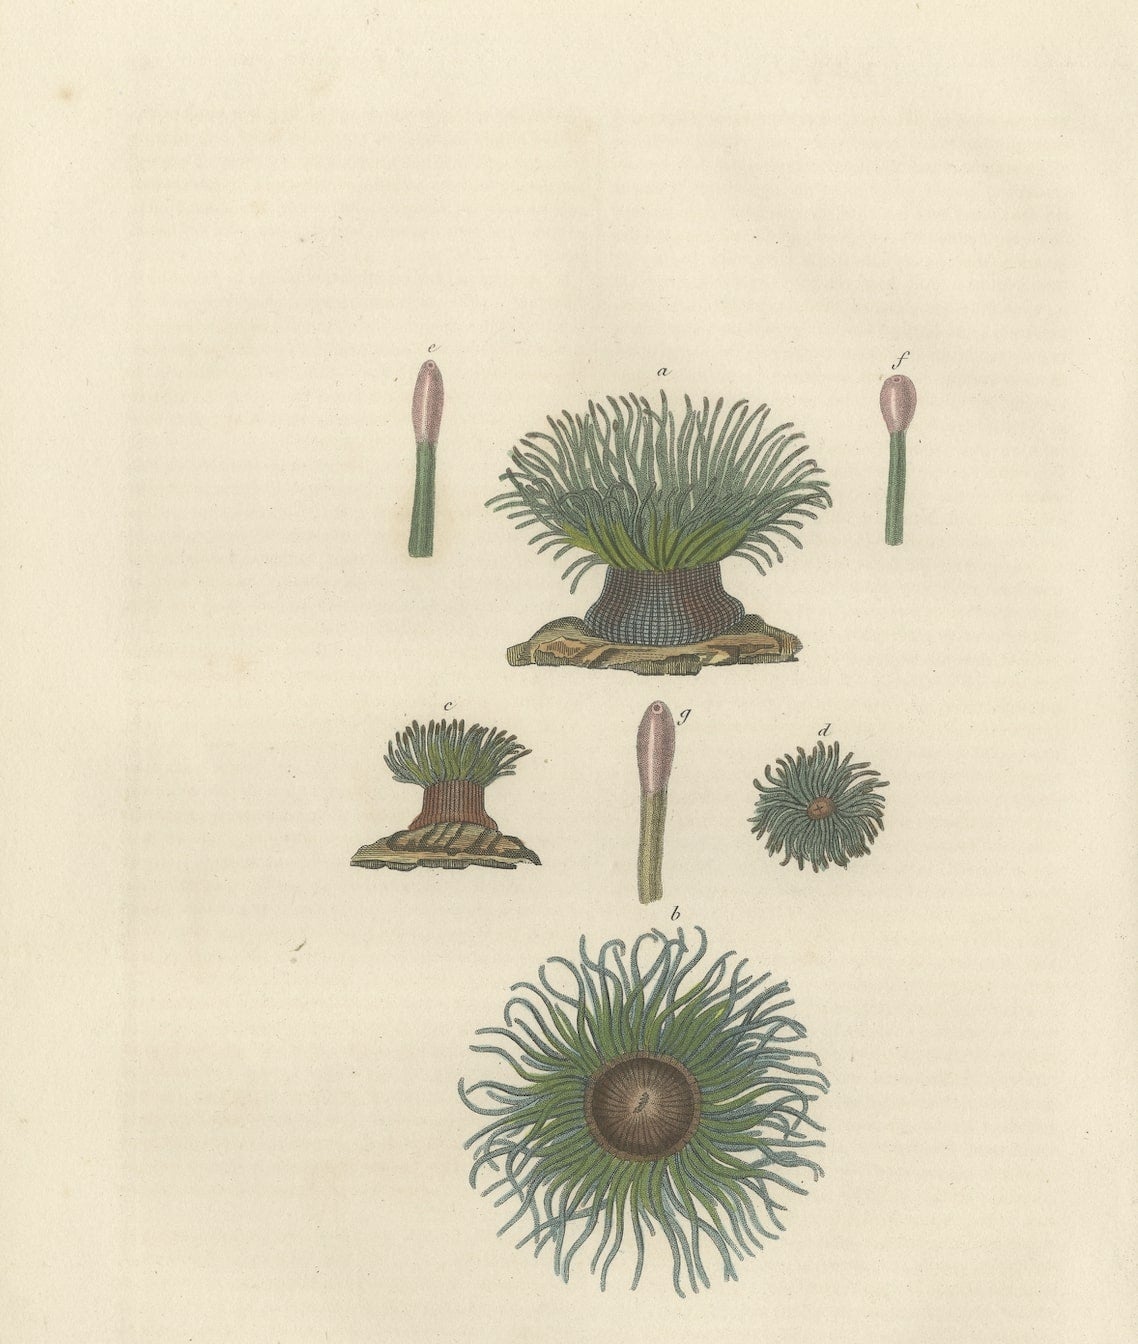 Original antique illustration of a depiction of Actinia viridis, commonly known as the Snakelocks Anemone. These creatures possess a green hue due to the presence of a green fluorescent protein, which is quite common in certain marine organisms like